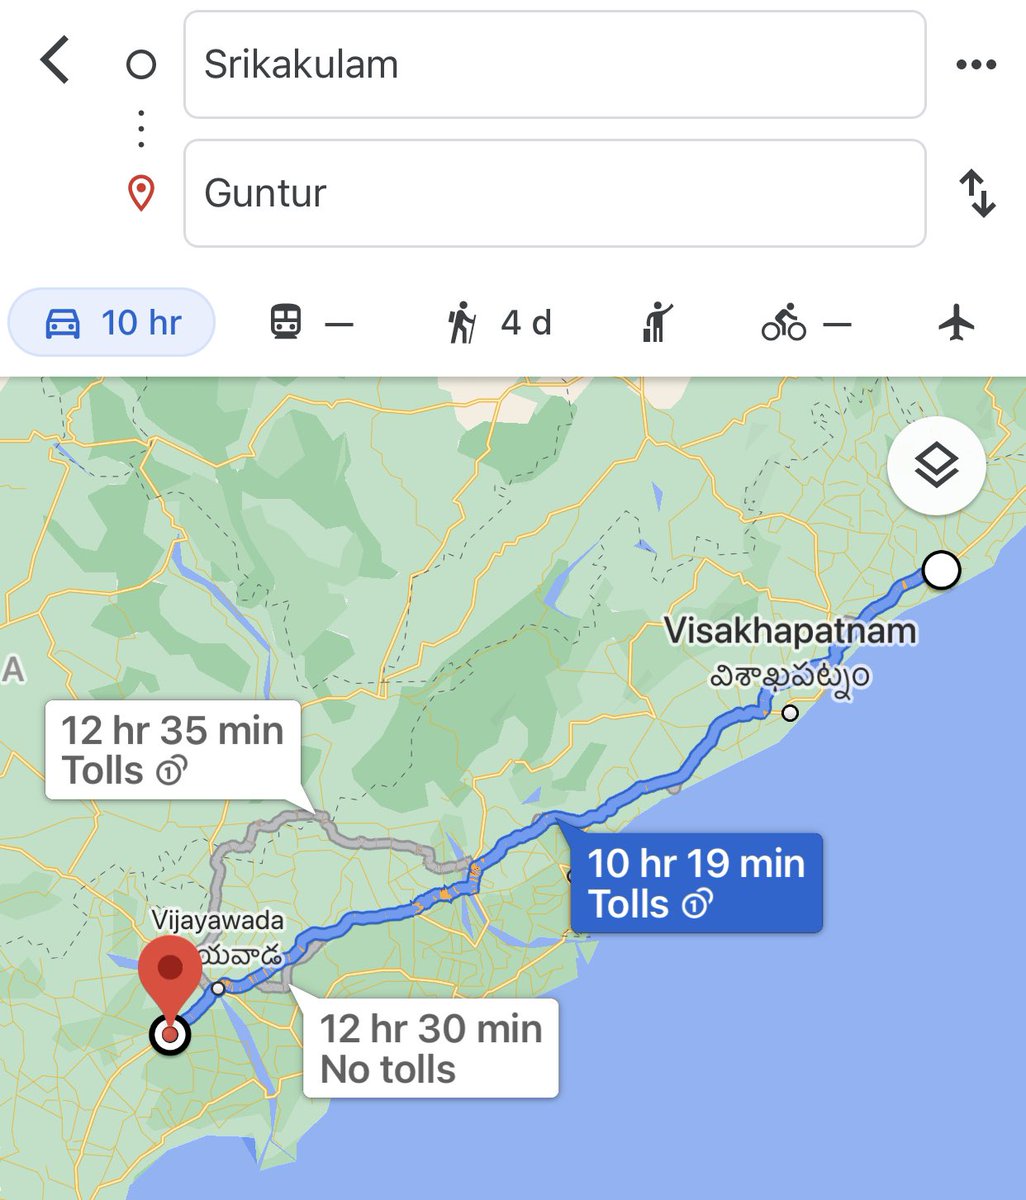 14) Also how far is the motorbike trip ferrying her corpse from Guntur to Srikakulam by her sons? Almost 500 kilometers. Full day’s ride by car—even longer by motorbike.Now imagine if that was your own deceased mother wedged on a motorbike. That would be so gut wrenching.